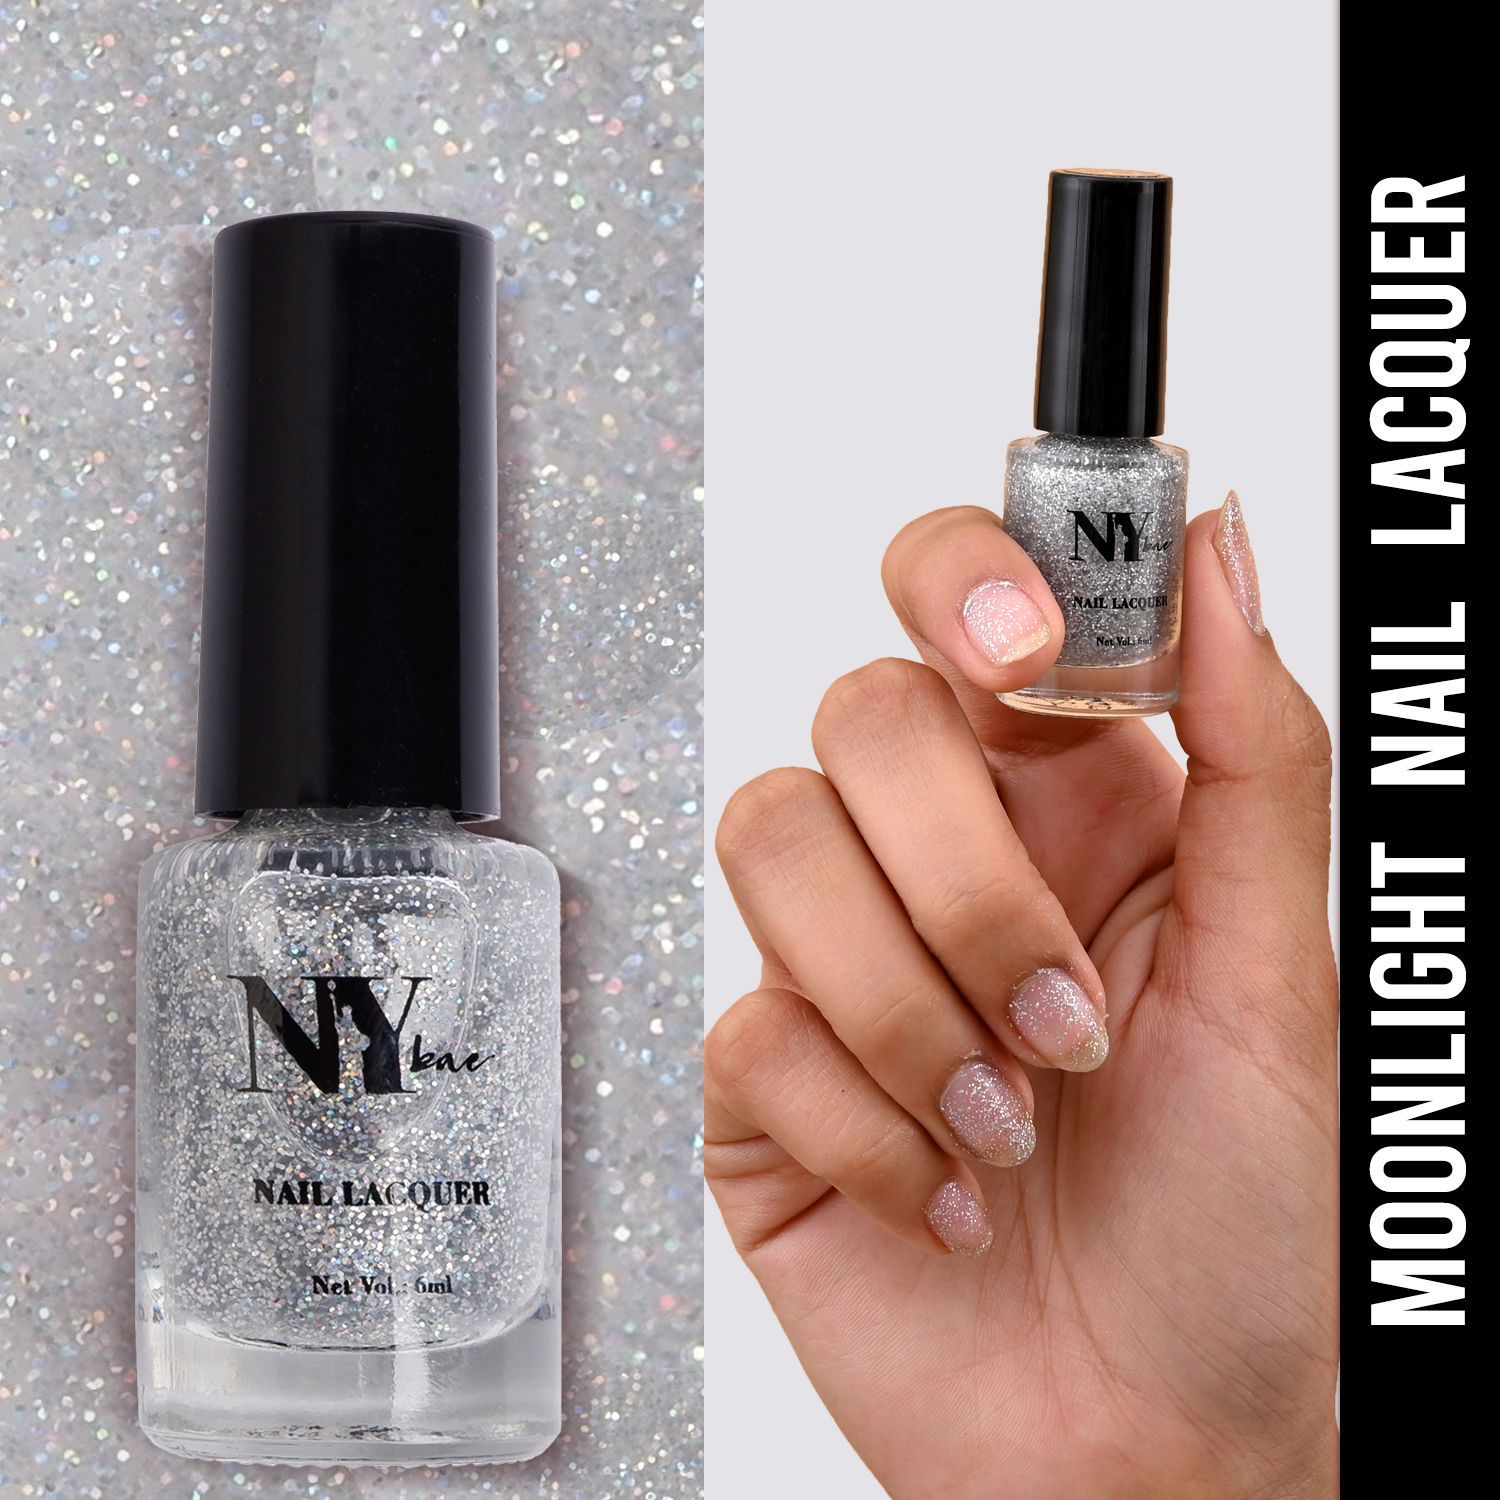 Buy NY Bae Nail Lacquer, Glitter | Shimmer Paint | Chip Resistant Polish | Highly Pigmented | Greys - Central Park Moonlight 5 (6 ml) - Purplle